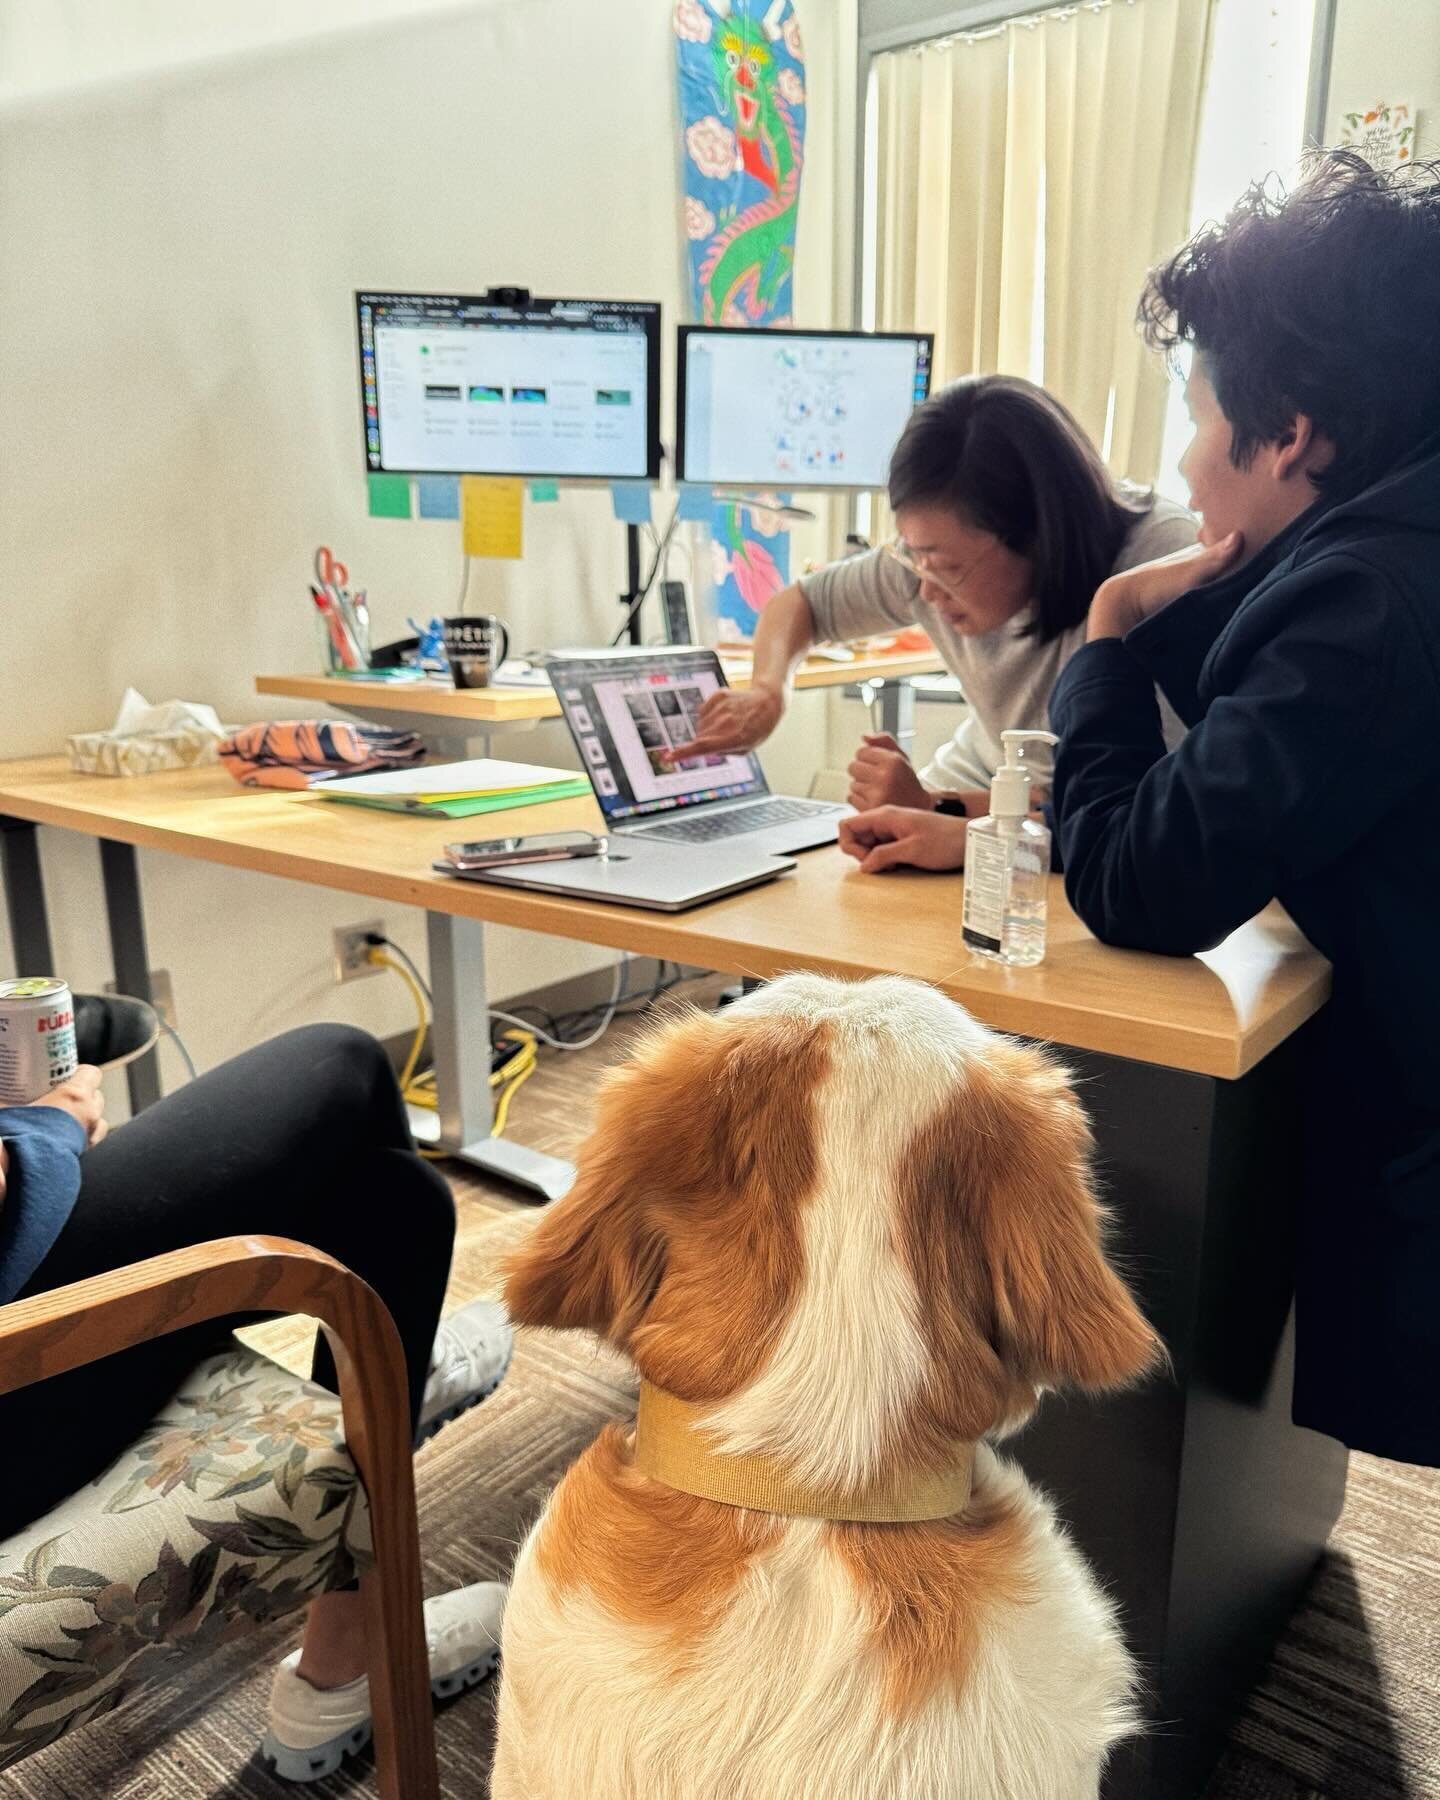 Lab meeting today: Loon the dog joining in a debate about whether or not there are PNNs around these specific neuronal subtypes. 

📸: Carly Steifman 😉